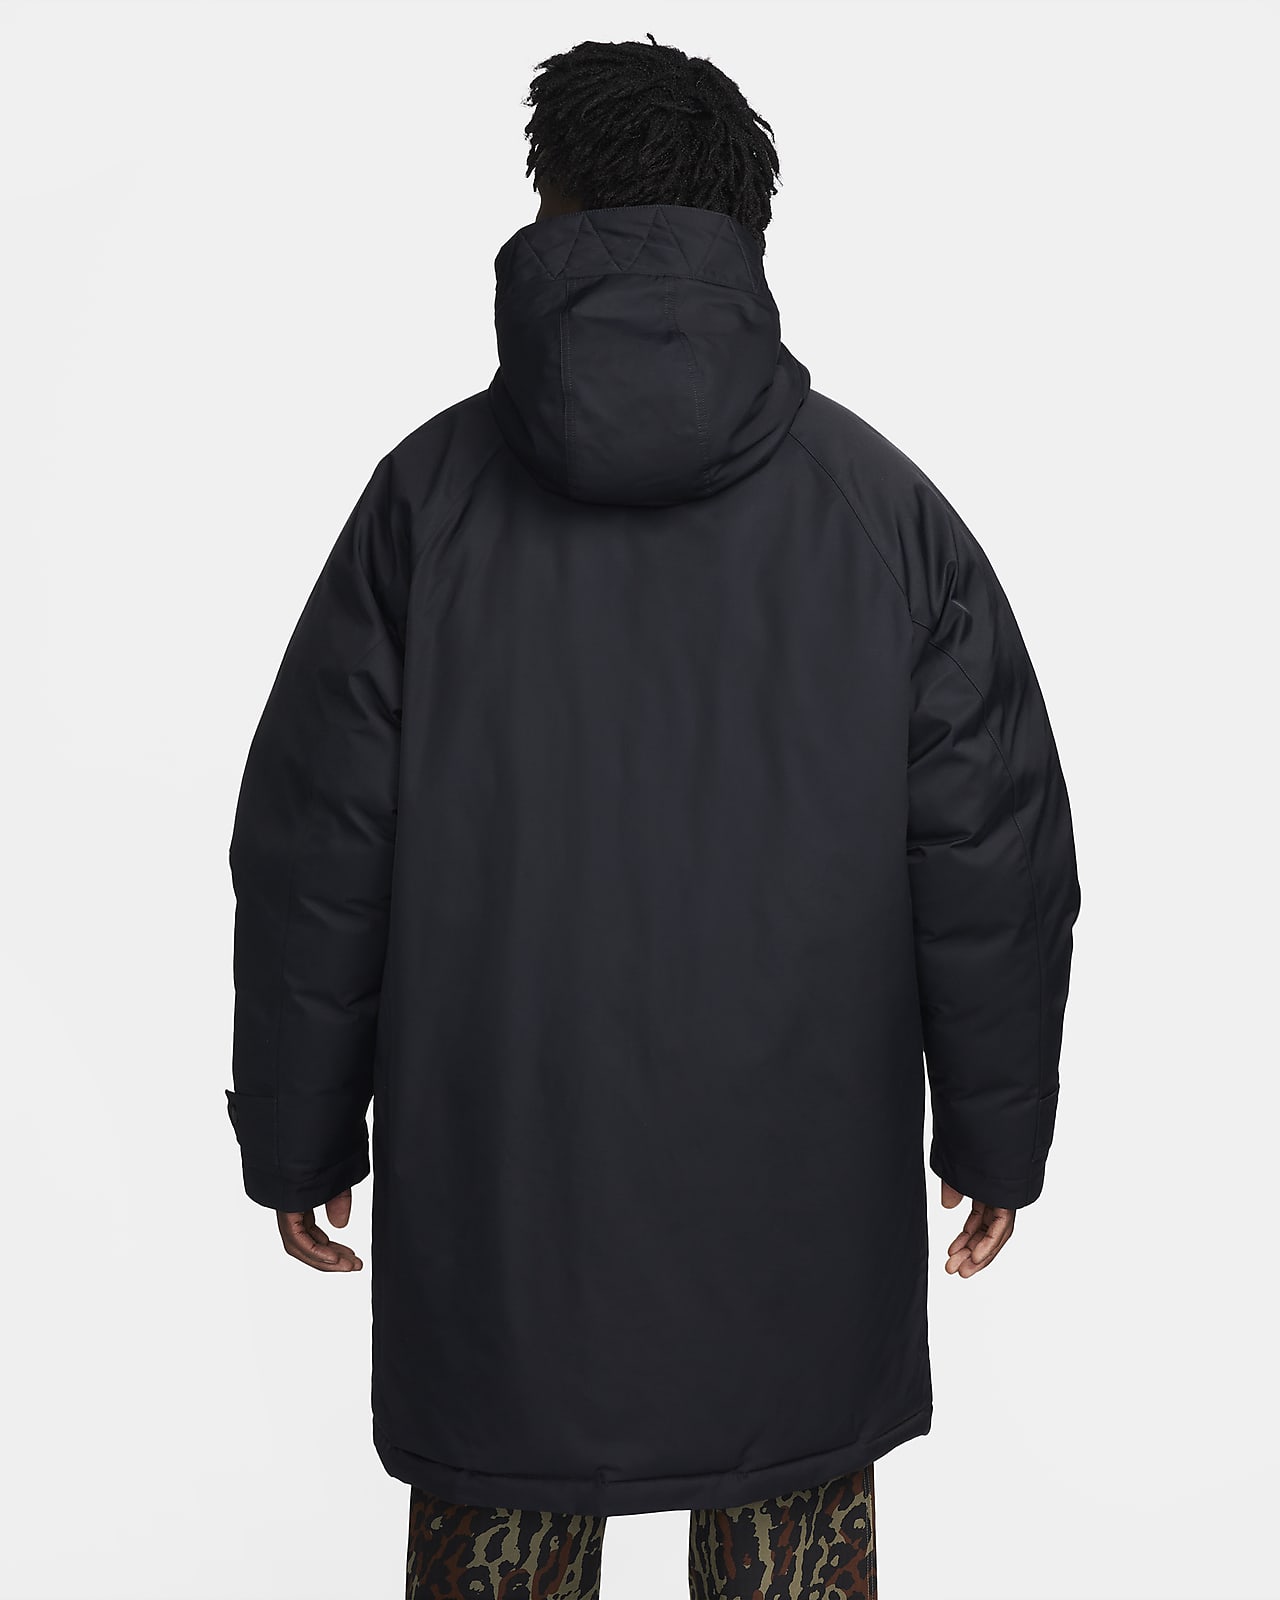 Nike Life Men's Insulated Parka